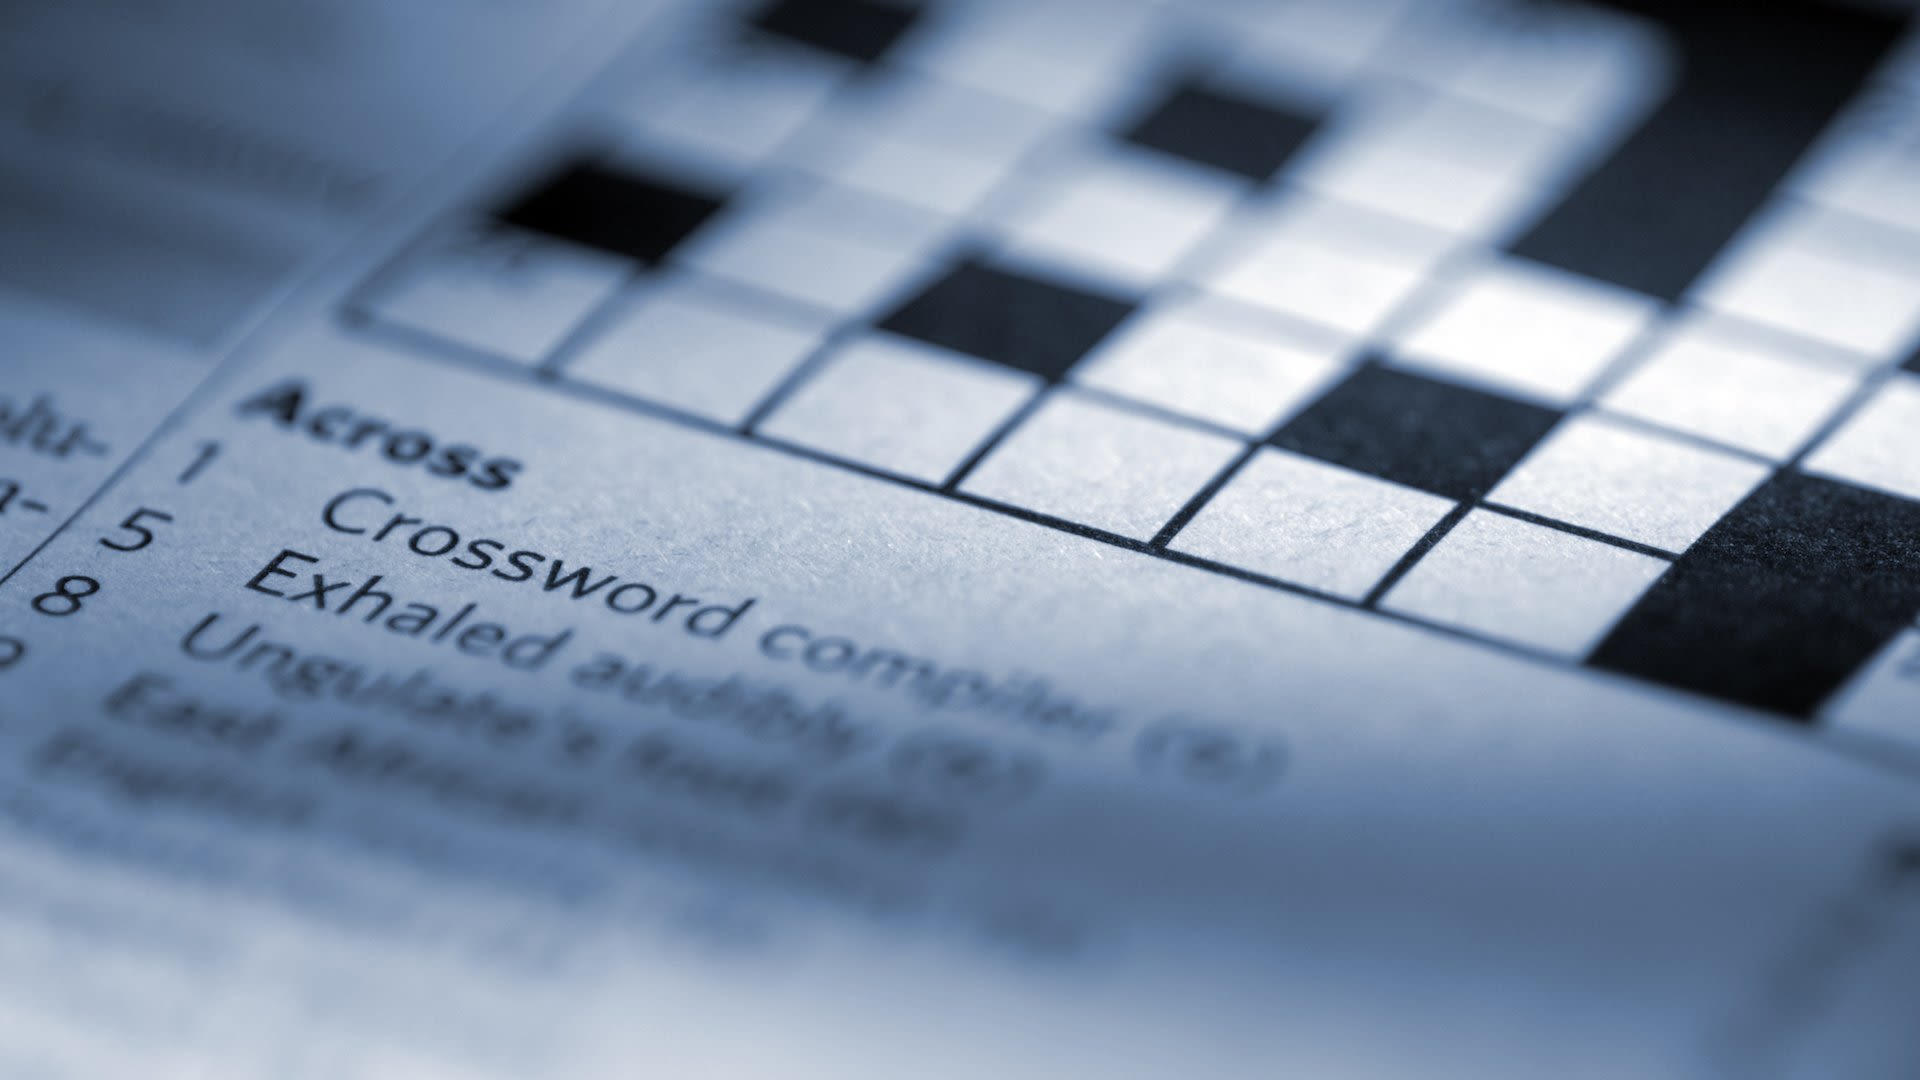 NYT's The Mini crossword answers for July 18